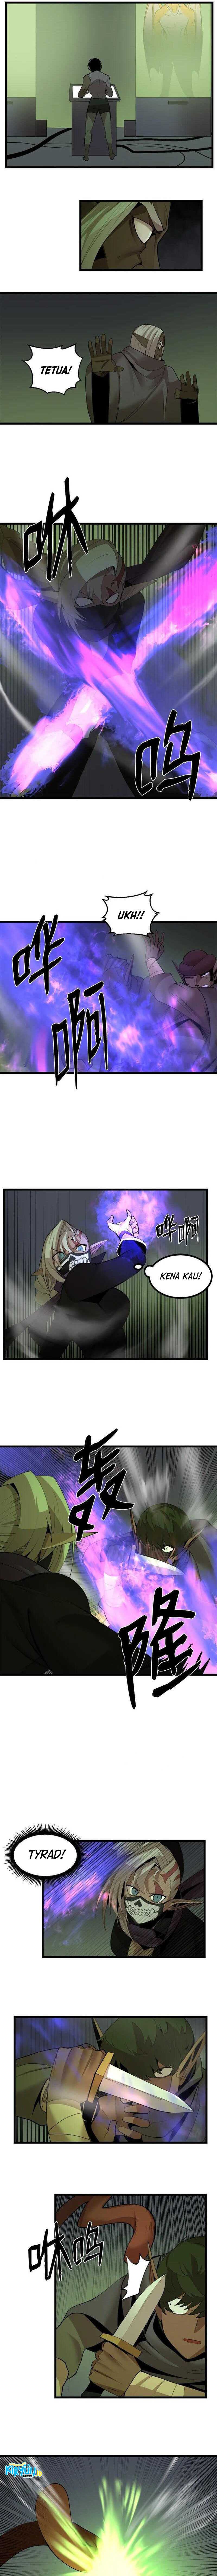 The Dungeon Master Chapter 111